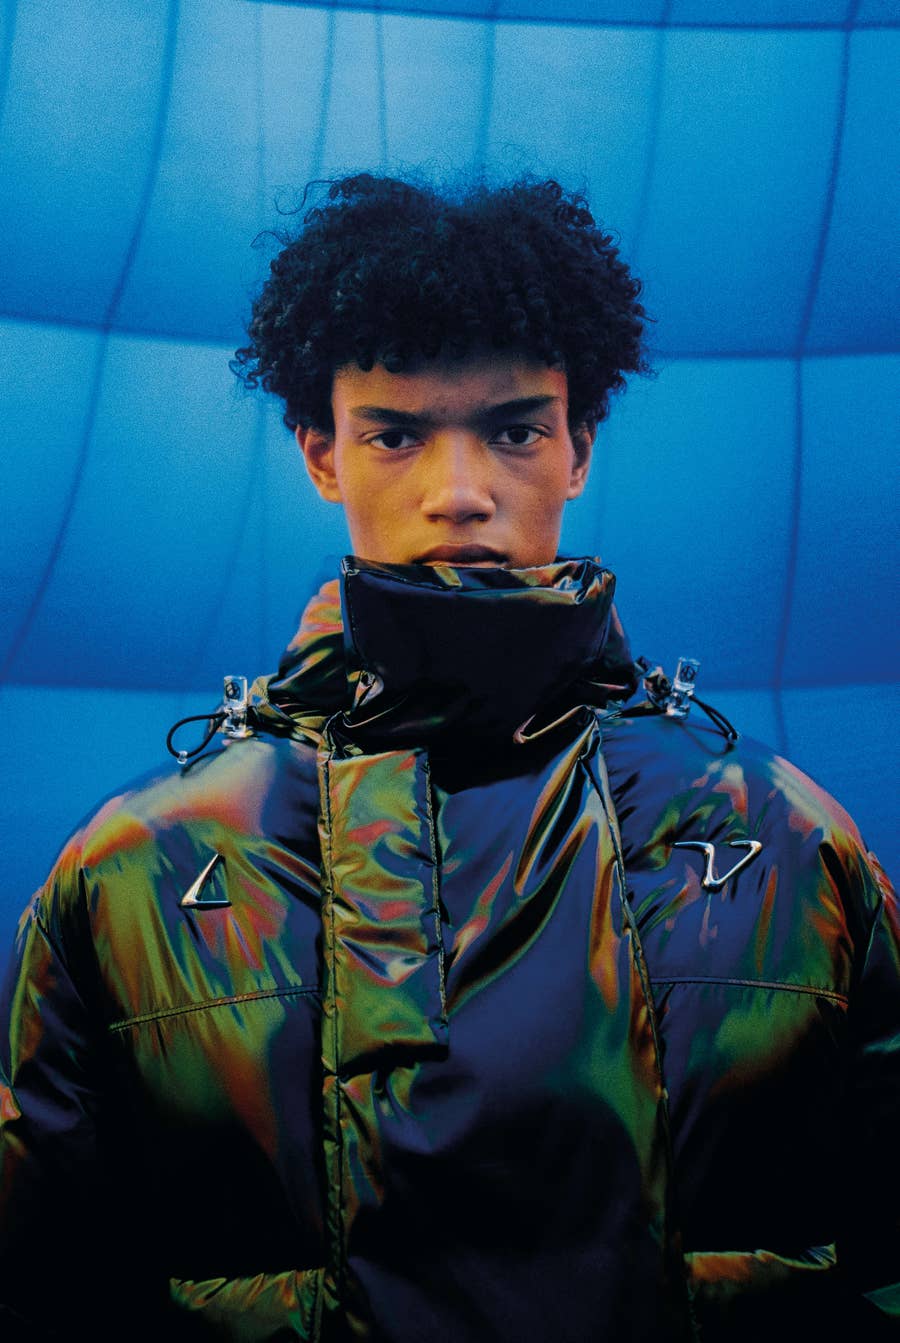 Where to Buy Louis Vuitton Rainbow Puffer Jackets